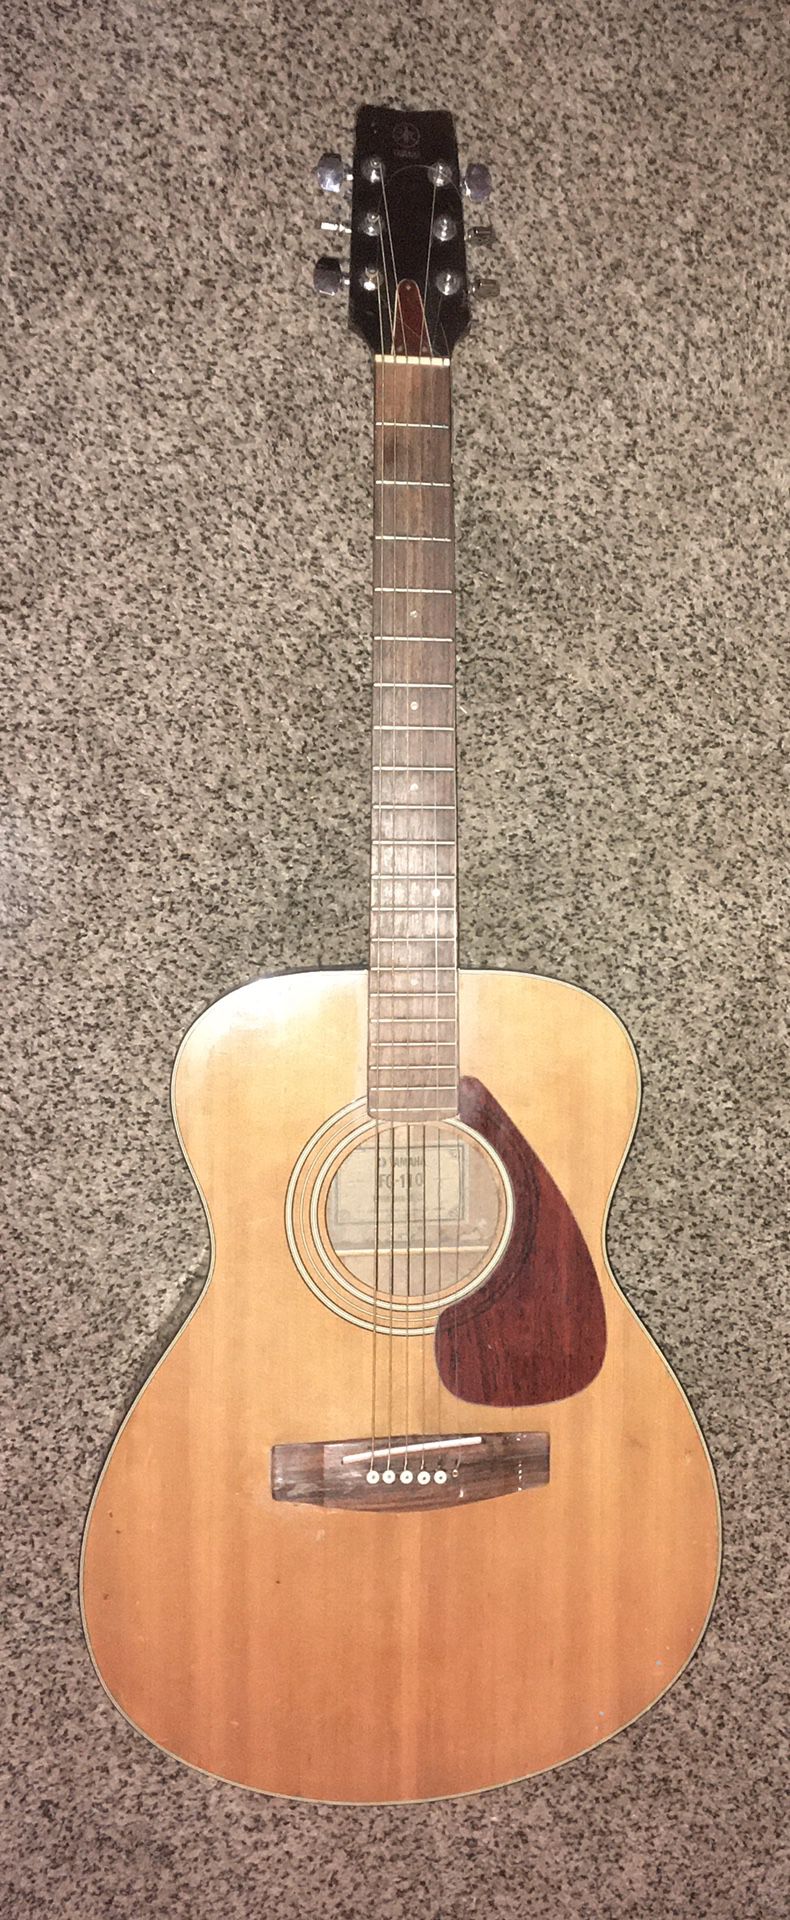 Yamaha FG-110 guitar for Sale in Chinese Camp, CA - OfferUp